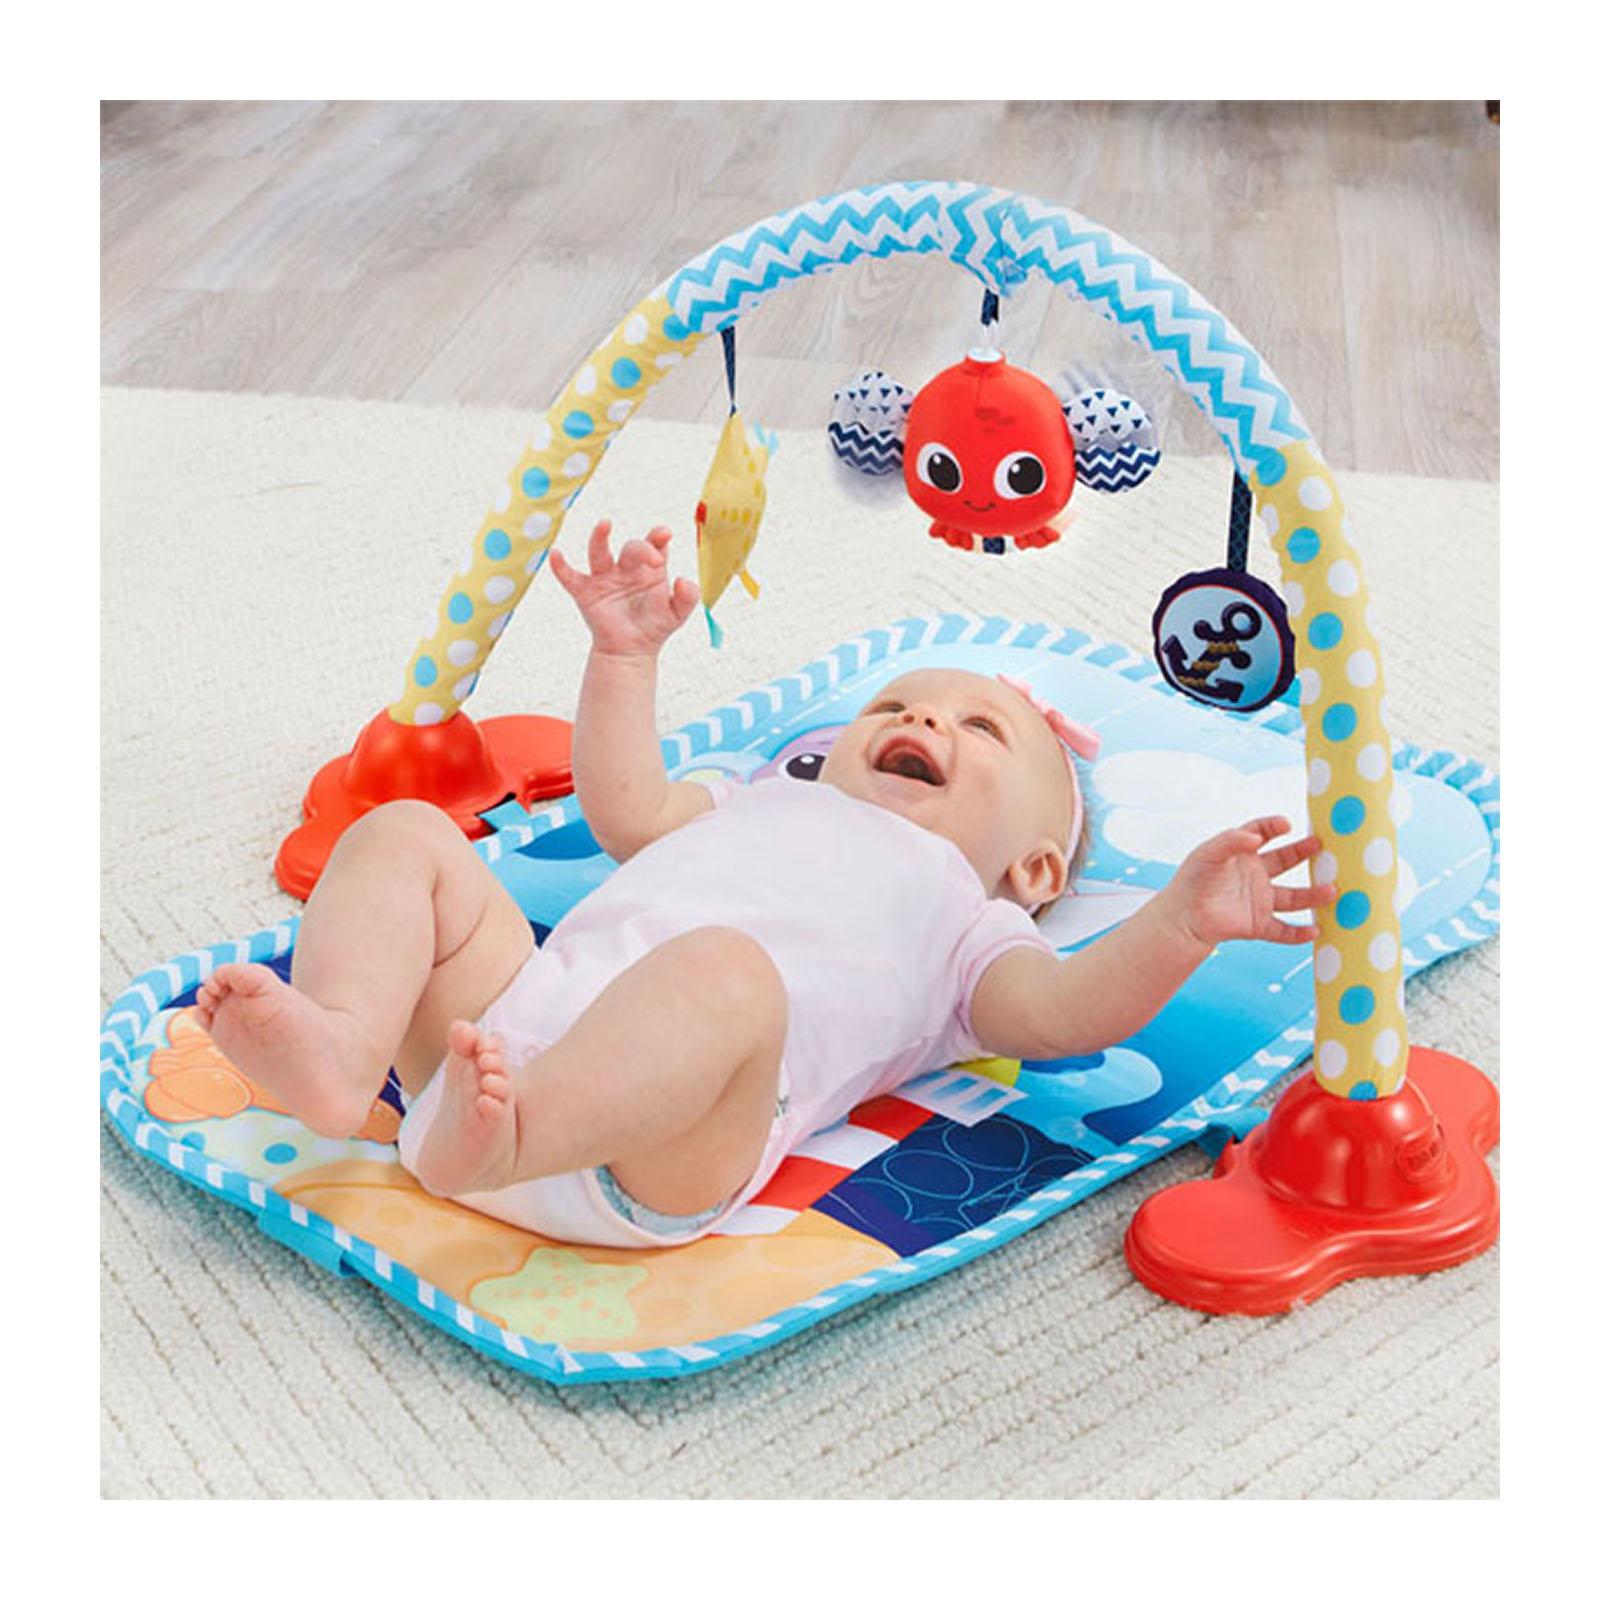 Little Tikes Soothe N' Spin Activity Gym